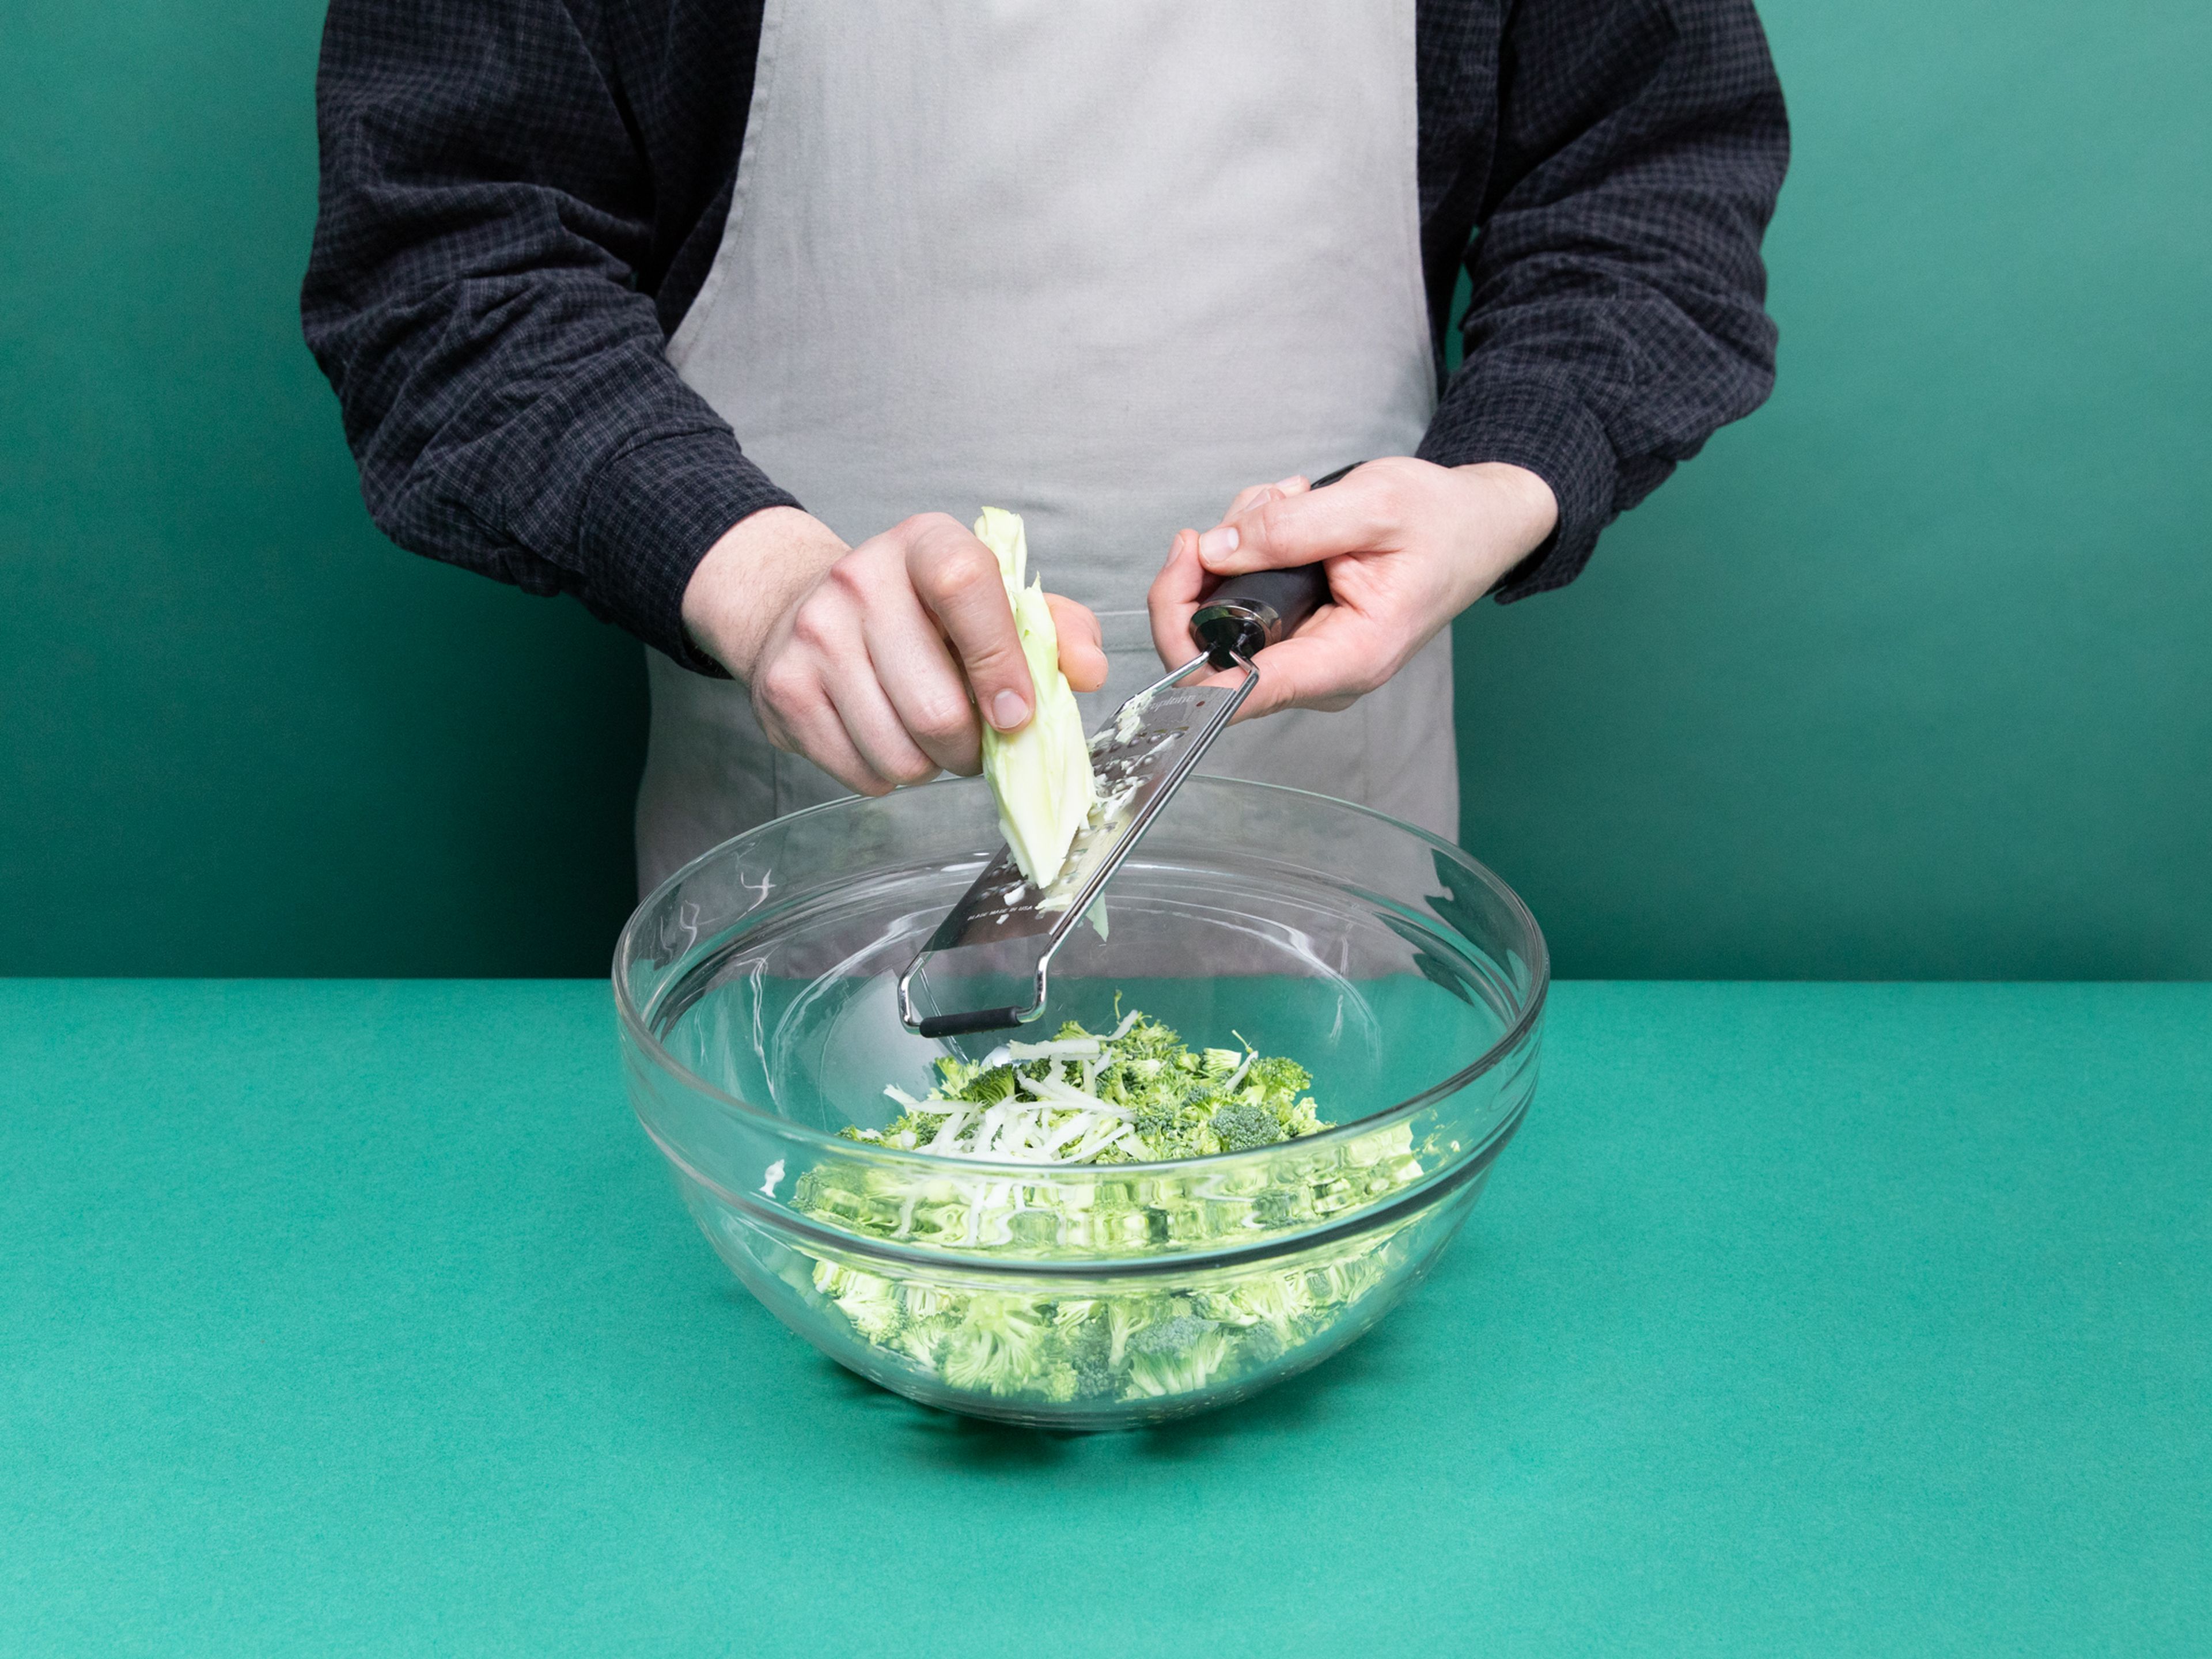 Preheat the oven to 160°C/325°F. Cut broccoli into very small florets and add to a large bowl. Peel the stem and use a grater to shave the stem into the same bowl with the florets. Do the same thing with the carrots. Peel and mince ginger. Thinly slice scallions at an angle.